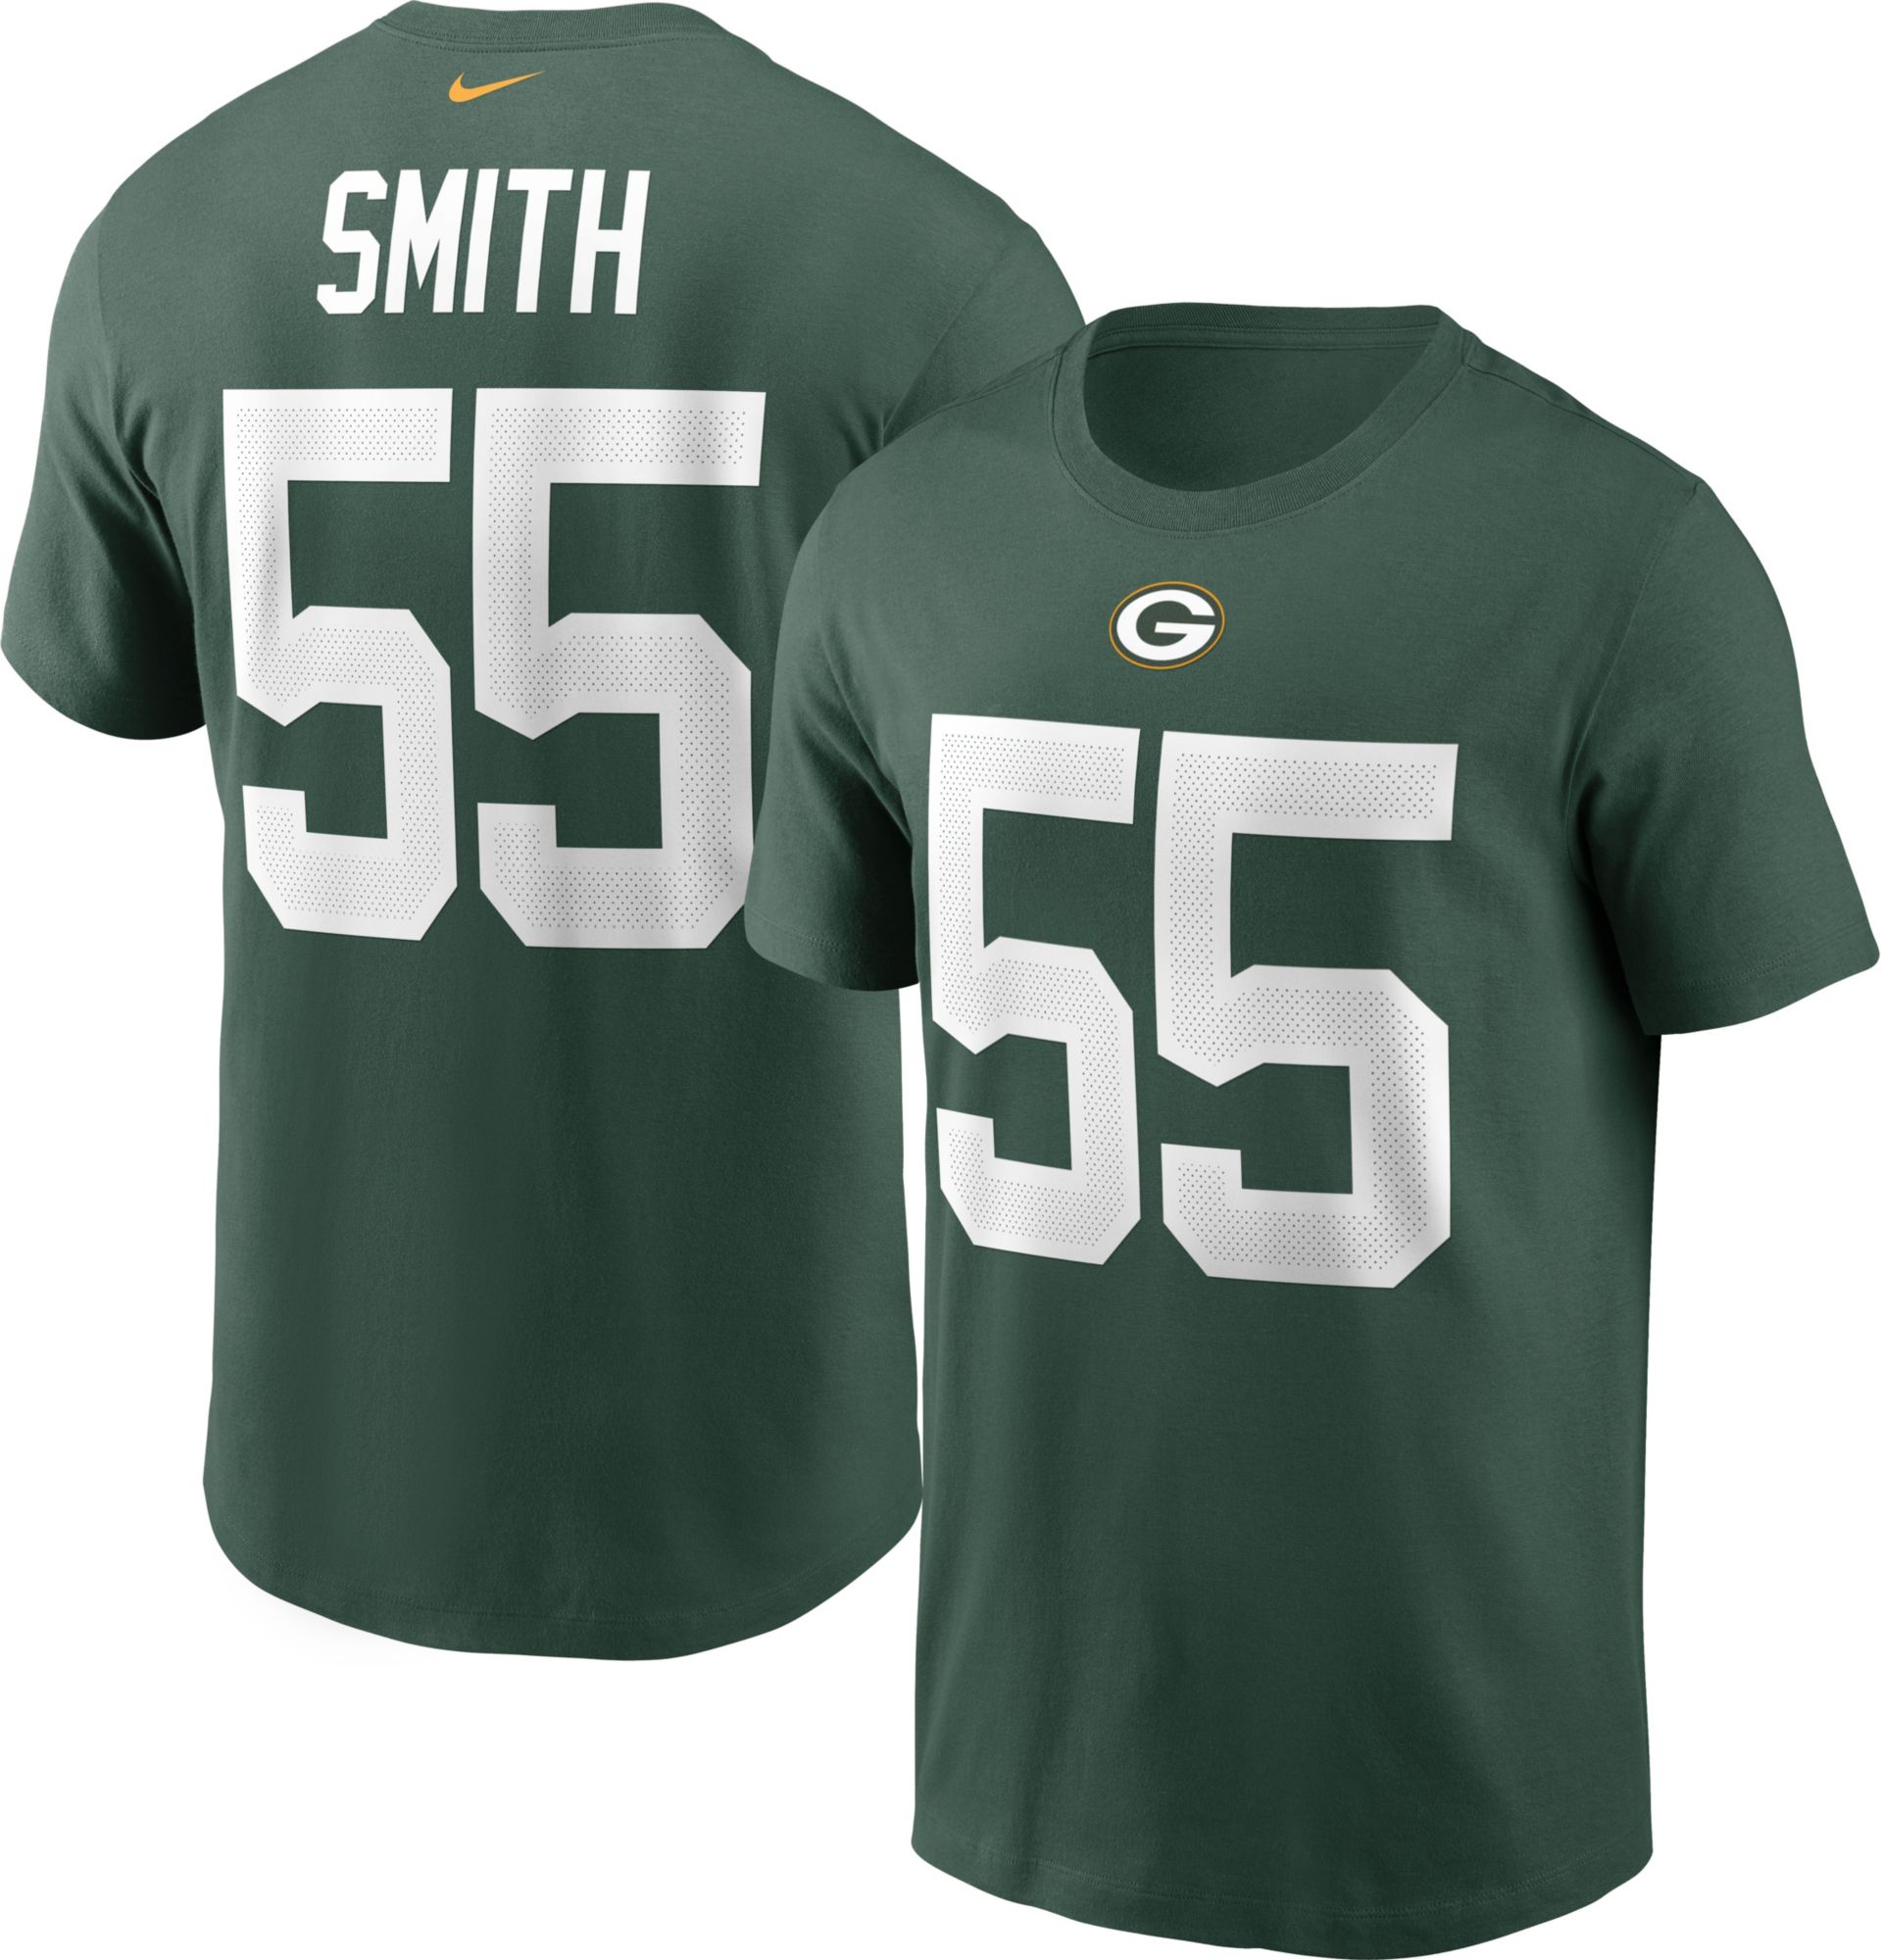 packers 55 jersey